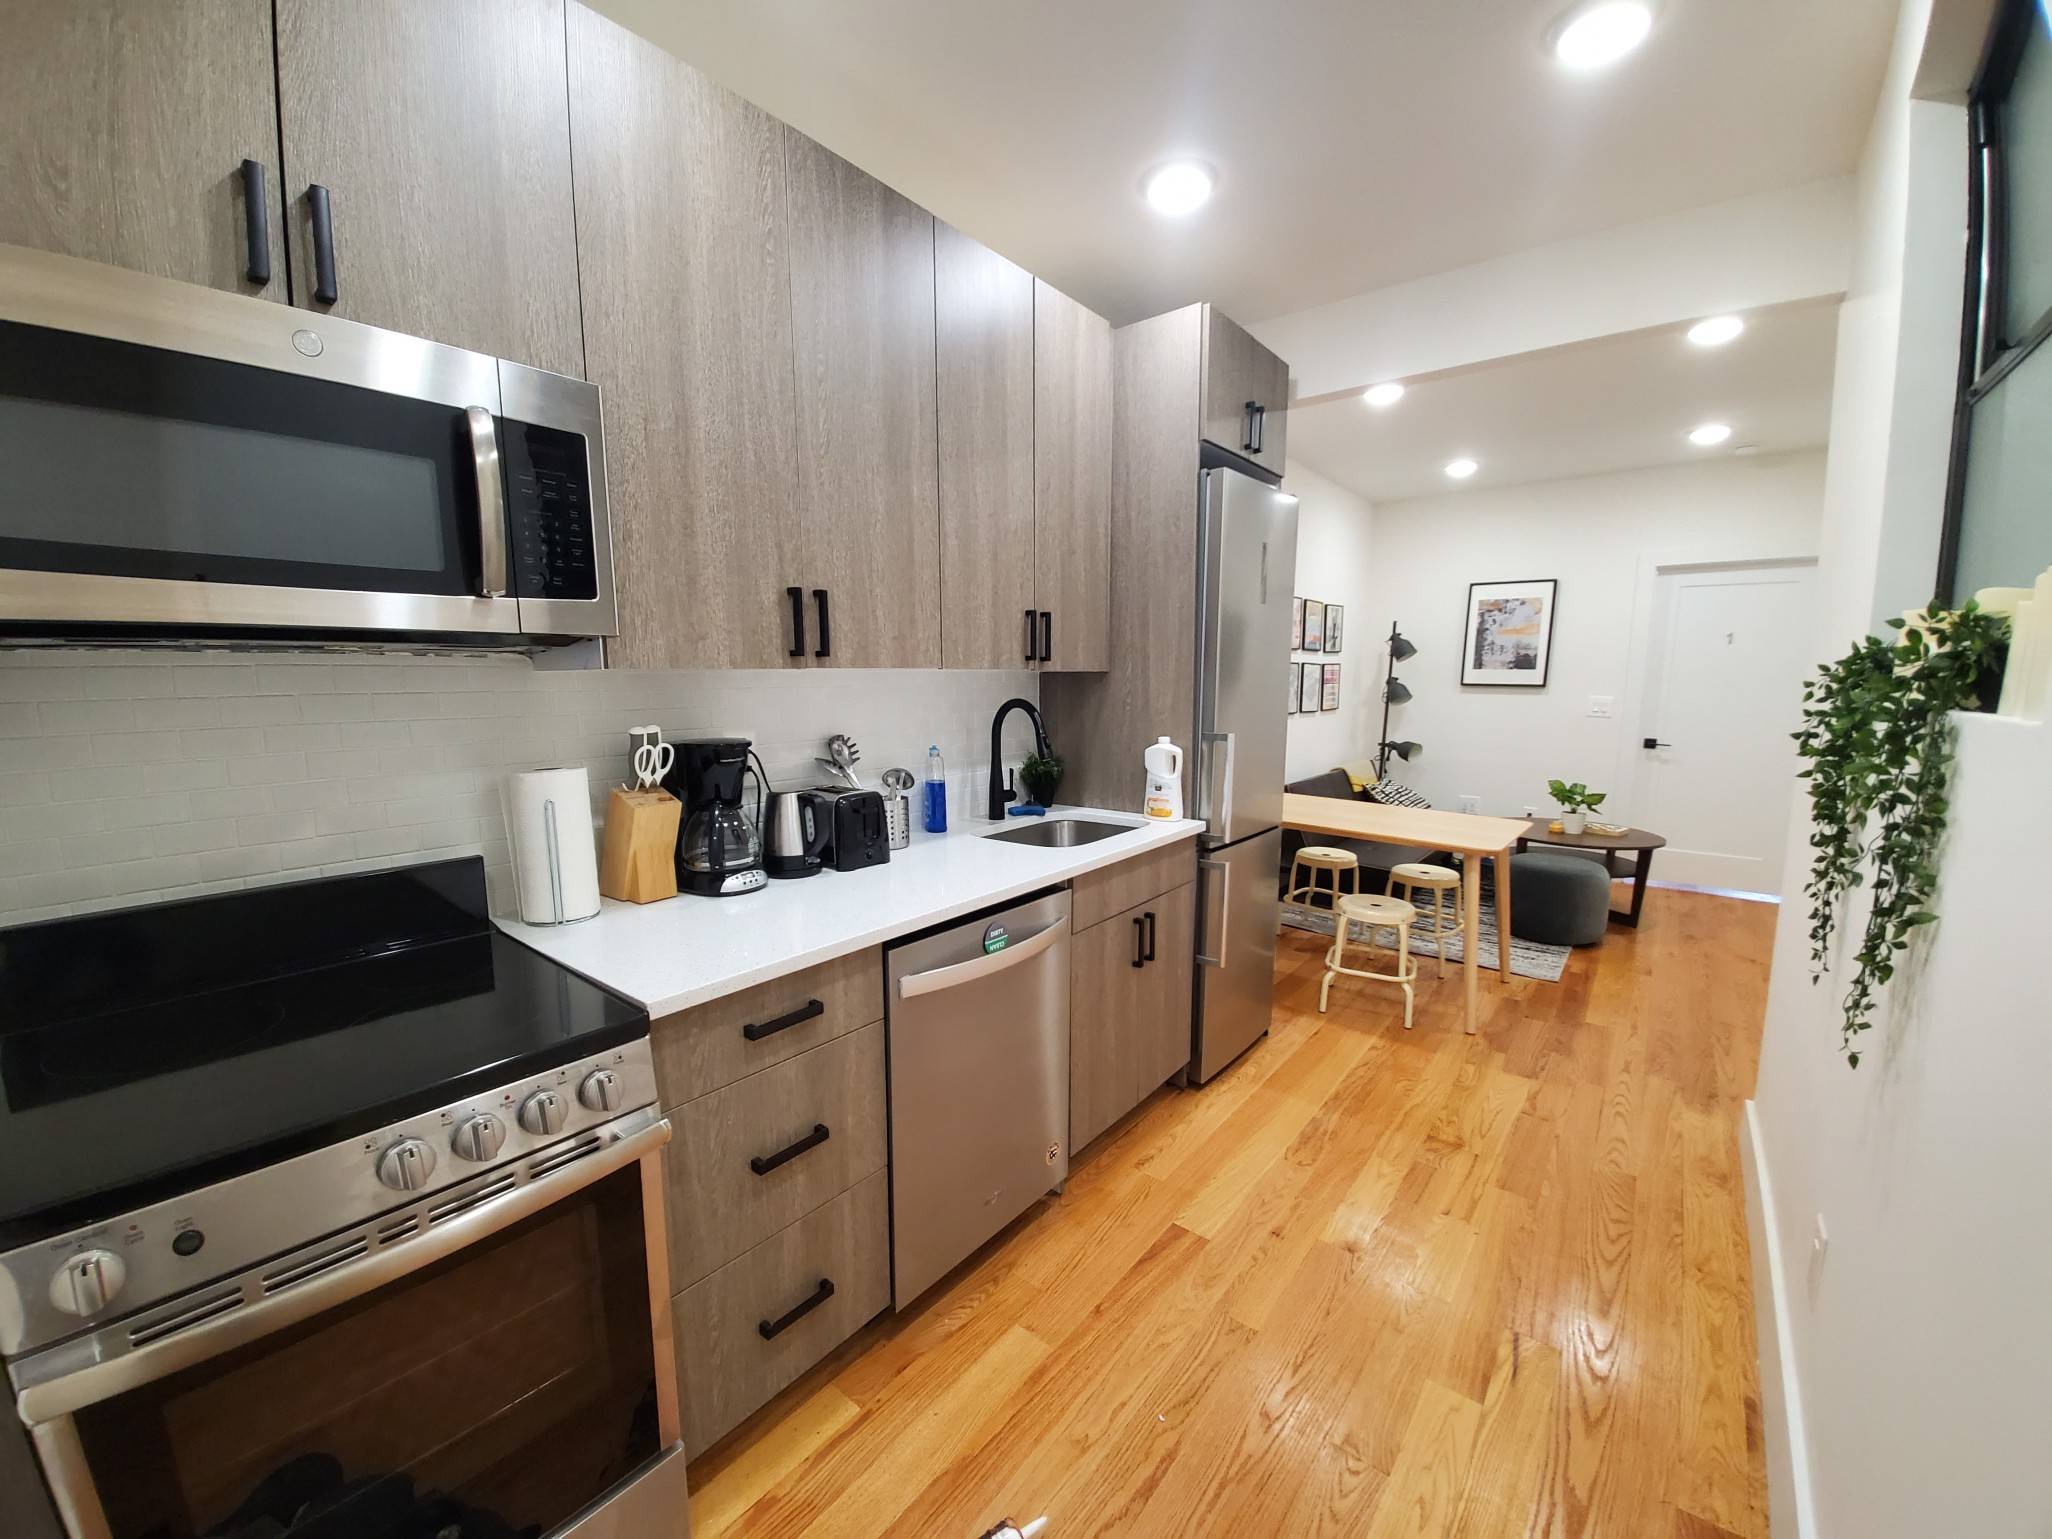 Be one of the FIRST to live in this Brand New gorgeous 3 bedroom in the heart of Harlem.